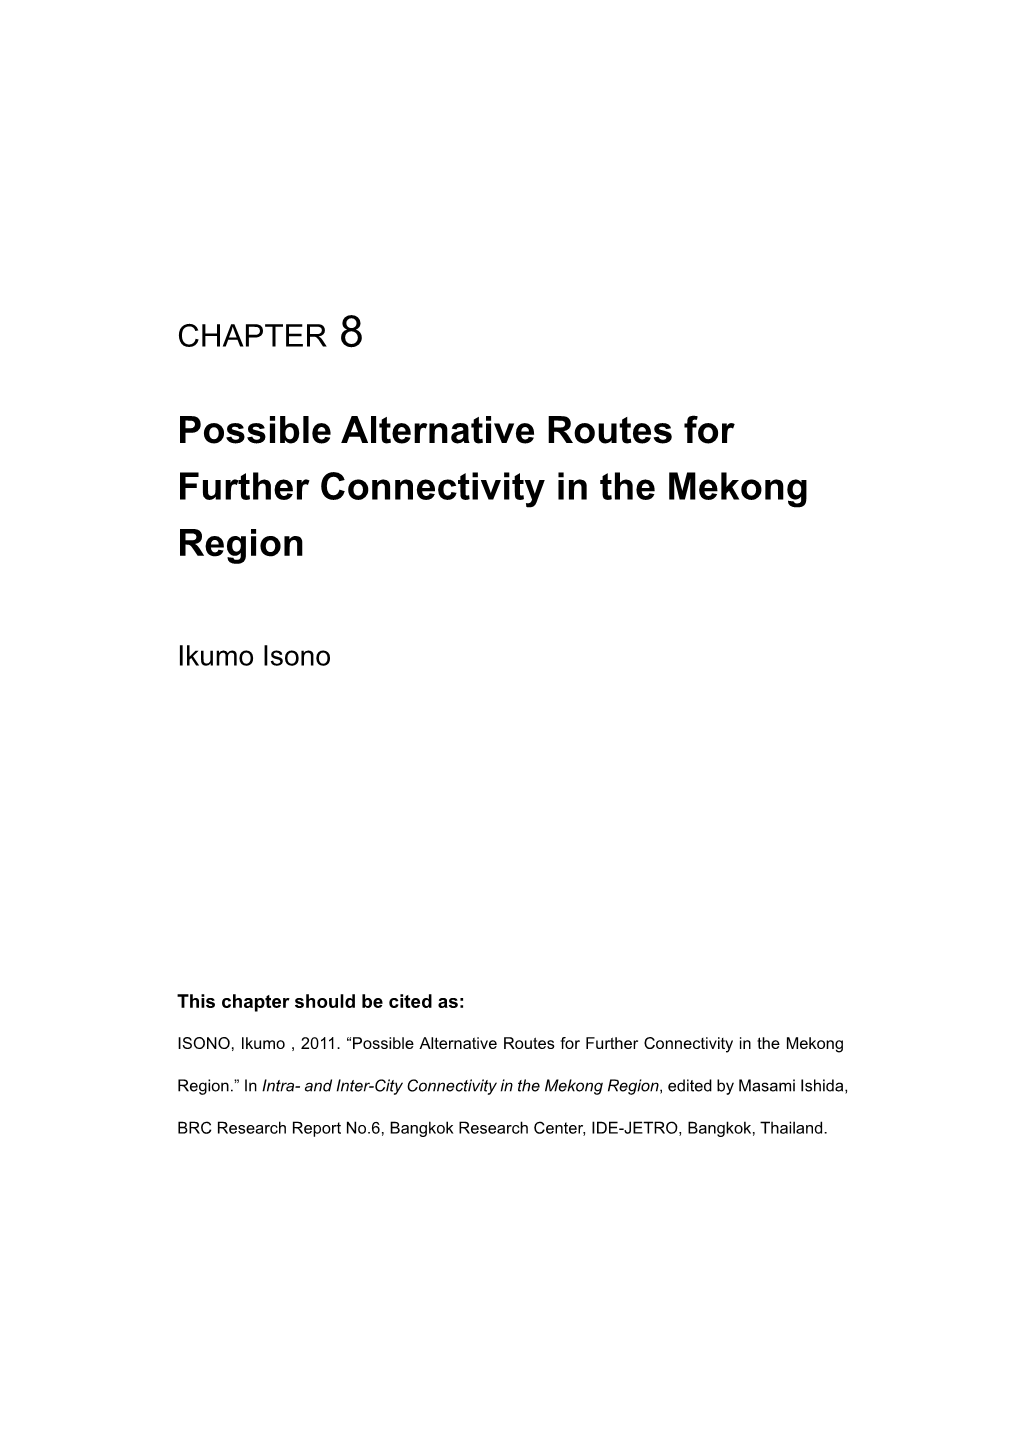 Possible Alternative Routes for Further Connectivity in the Mekong Region